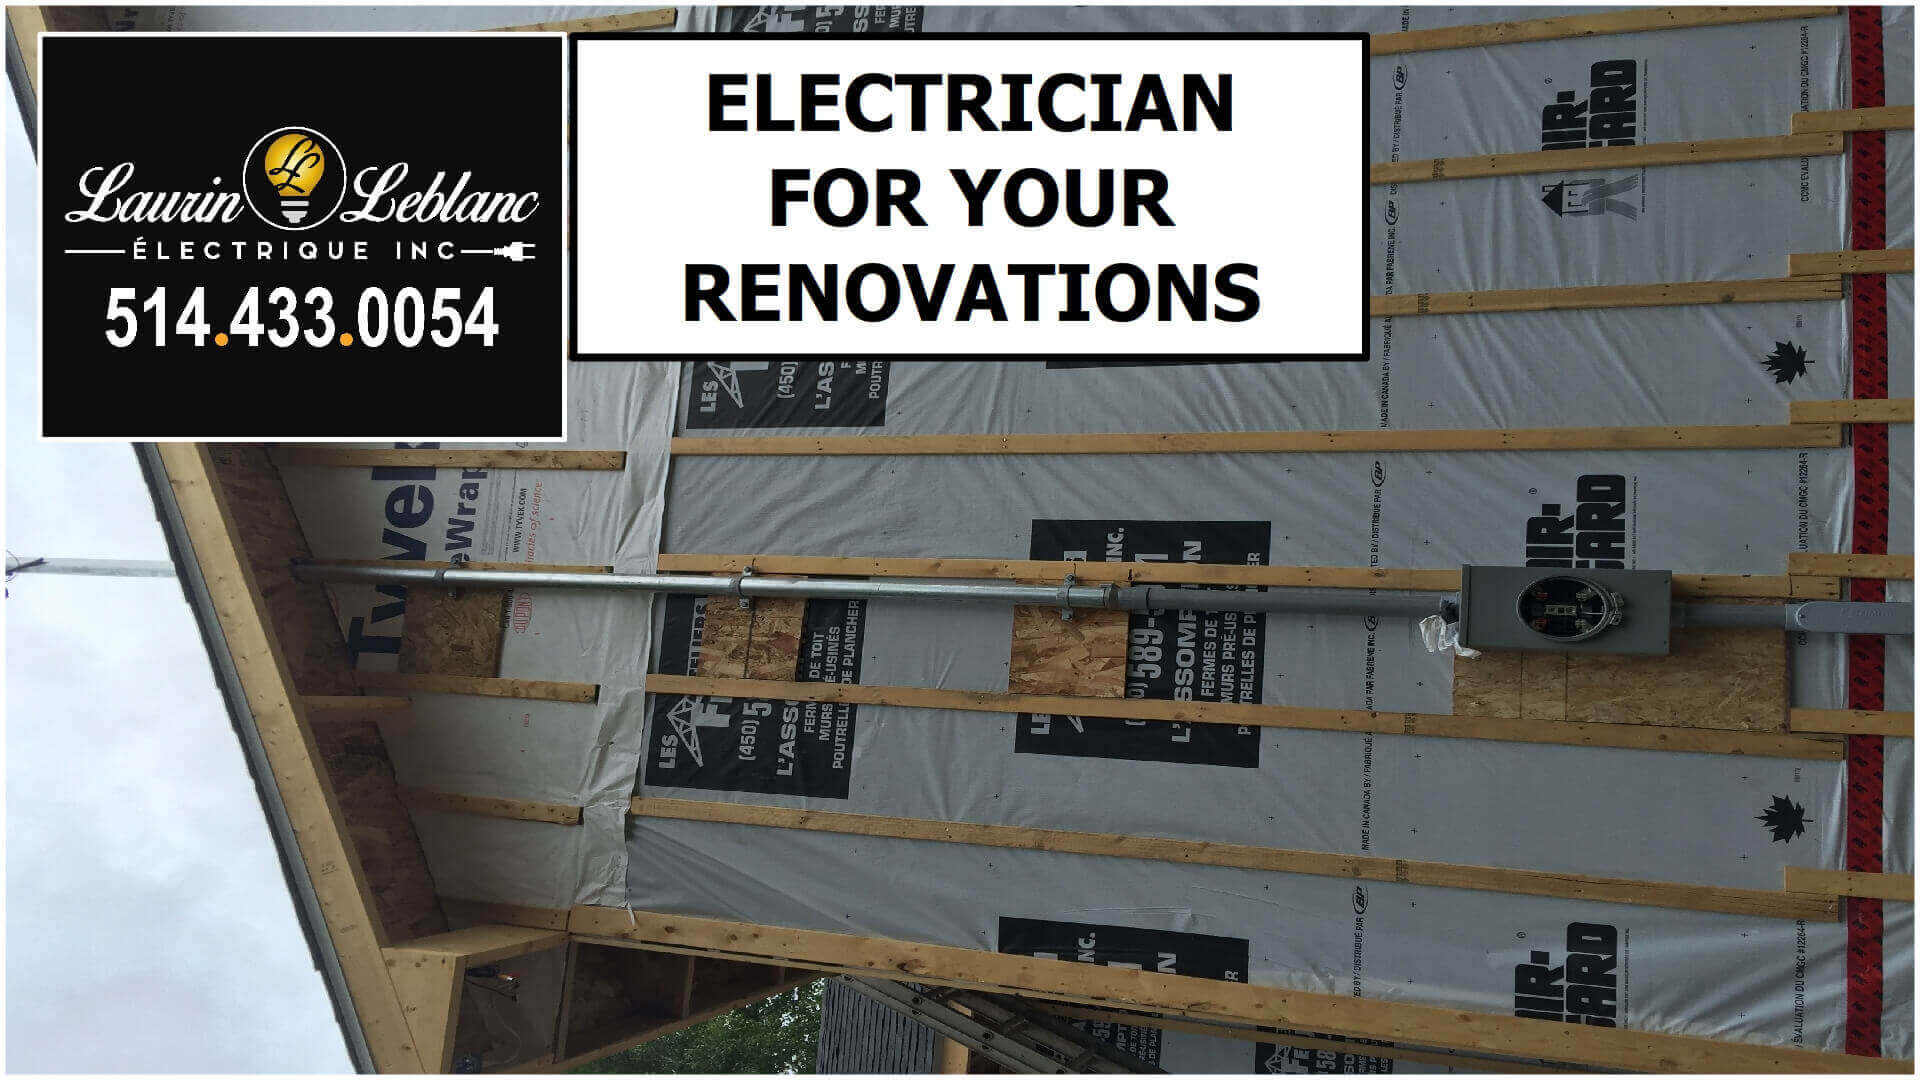 Electrician Renovations in Hudson